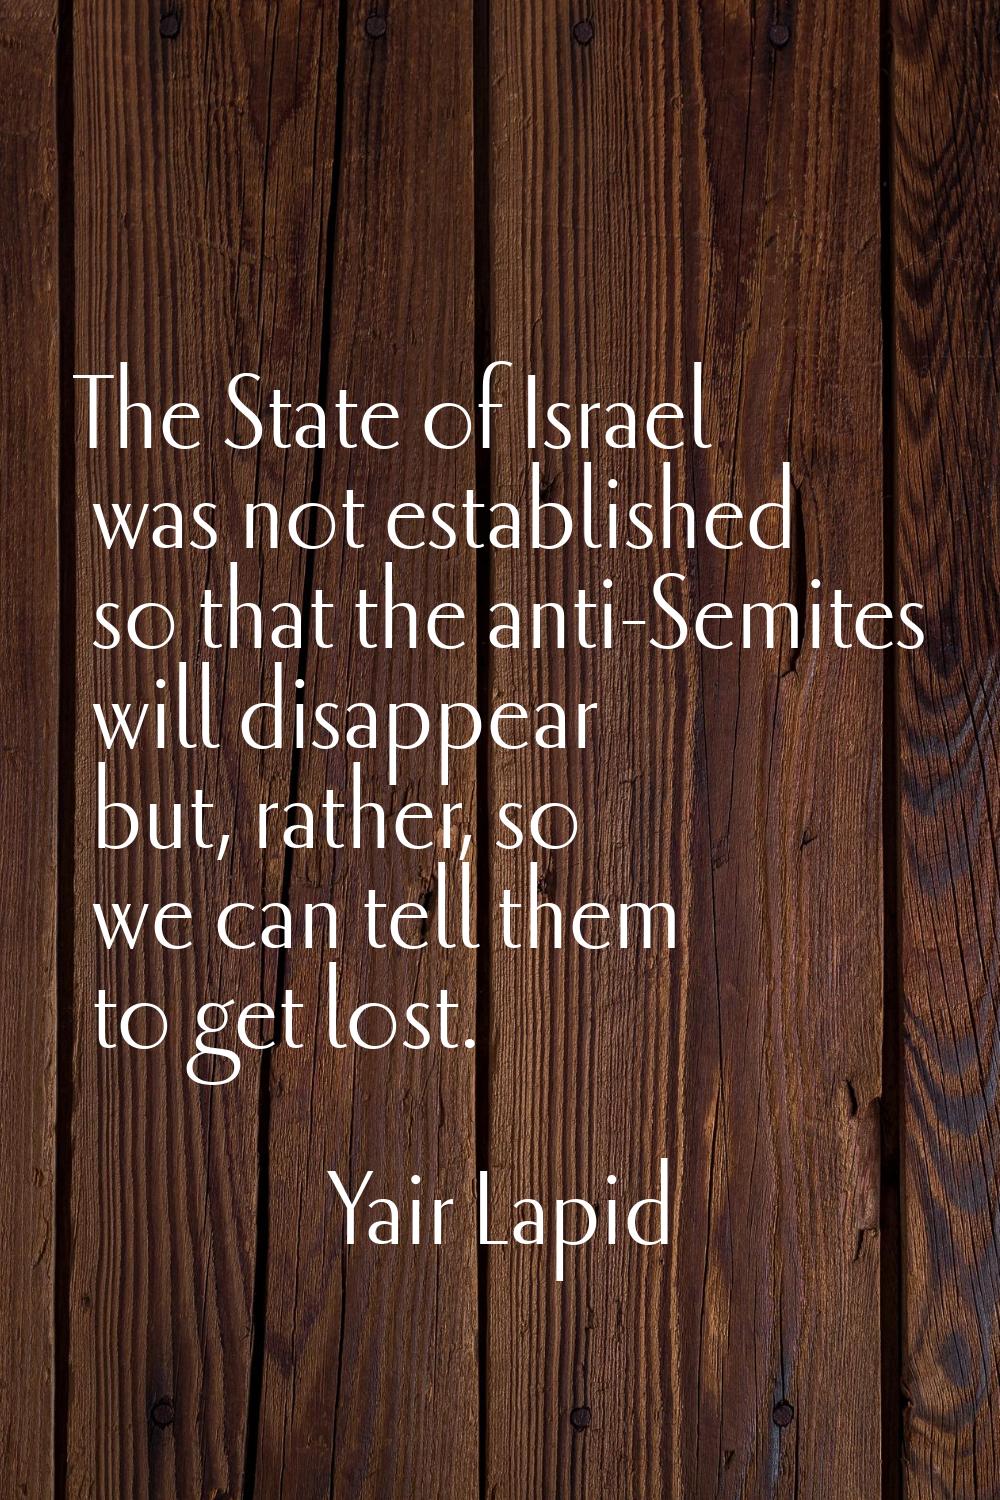 The State of Israel was not established so that the anti-Semites will disappear but, rather, so we 